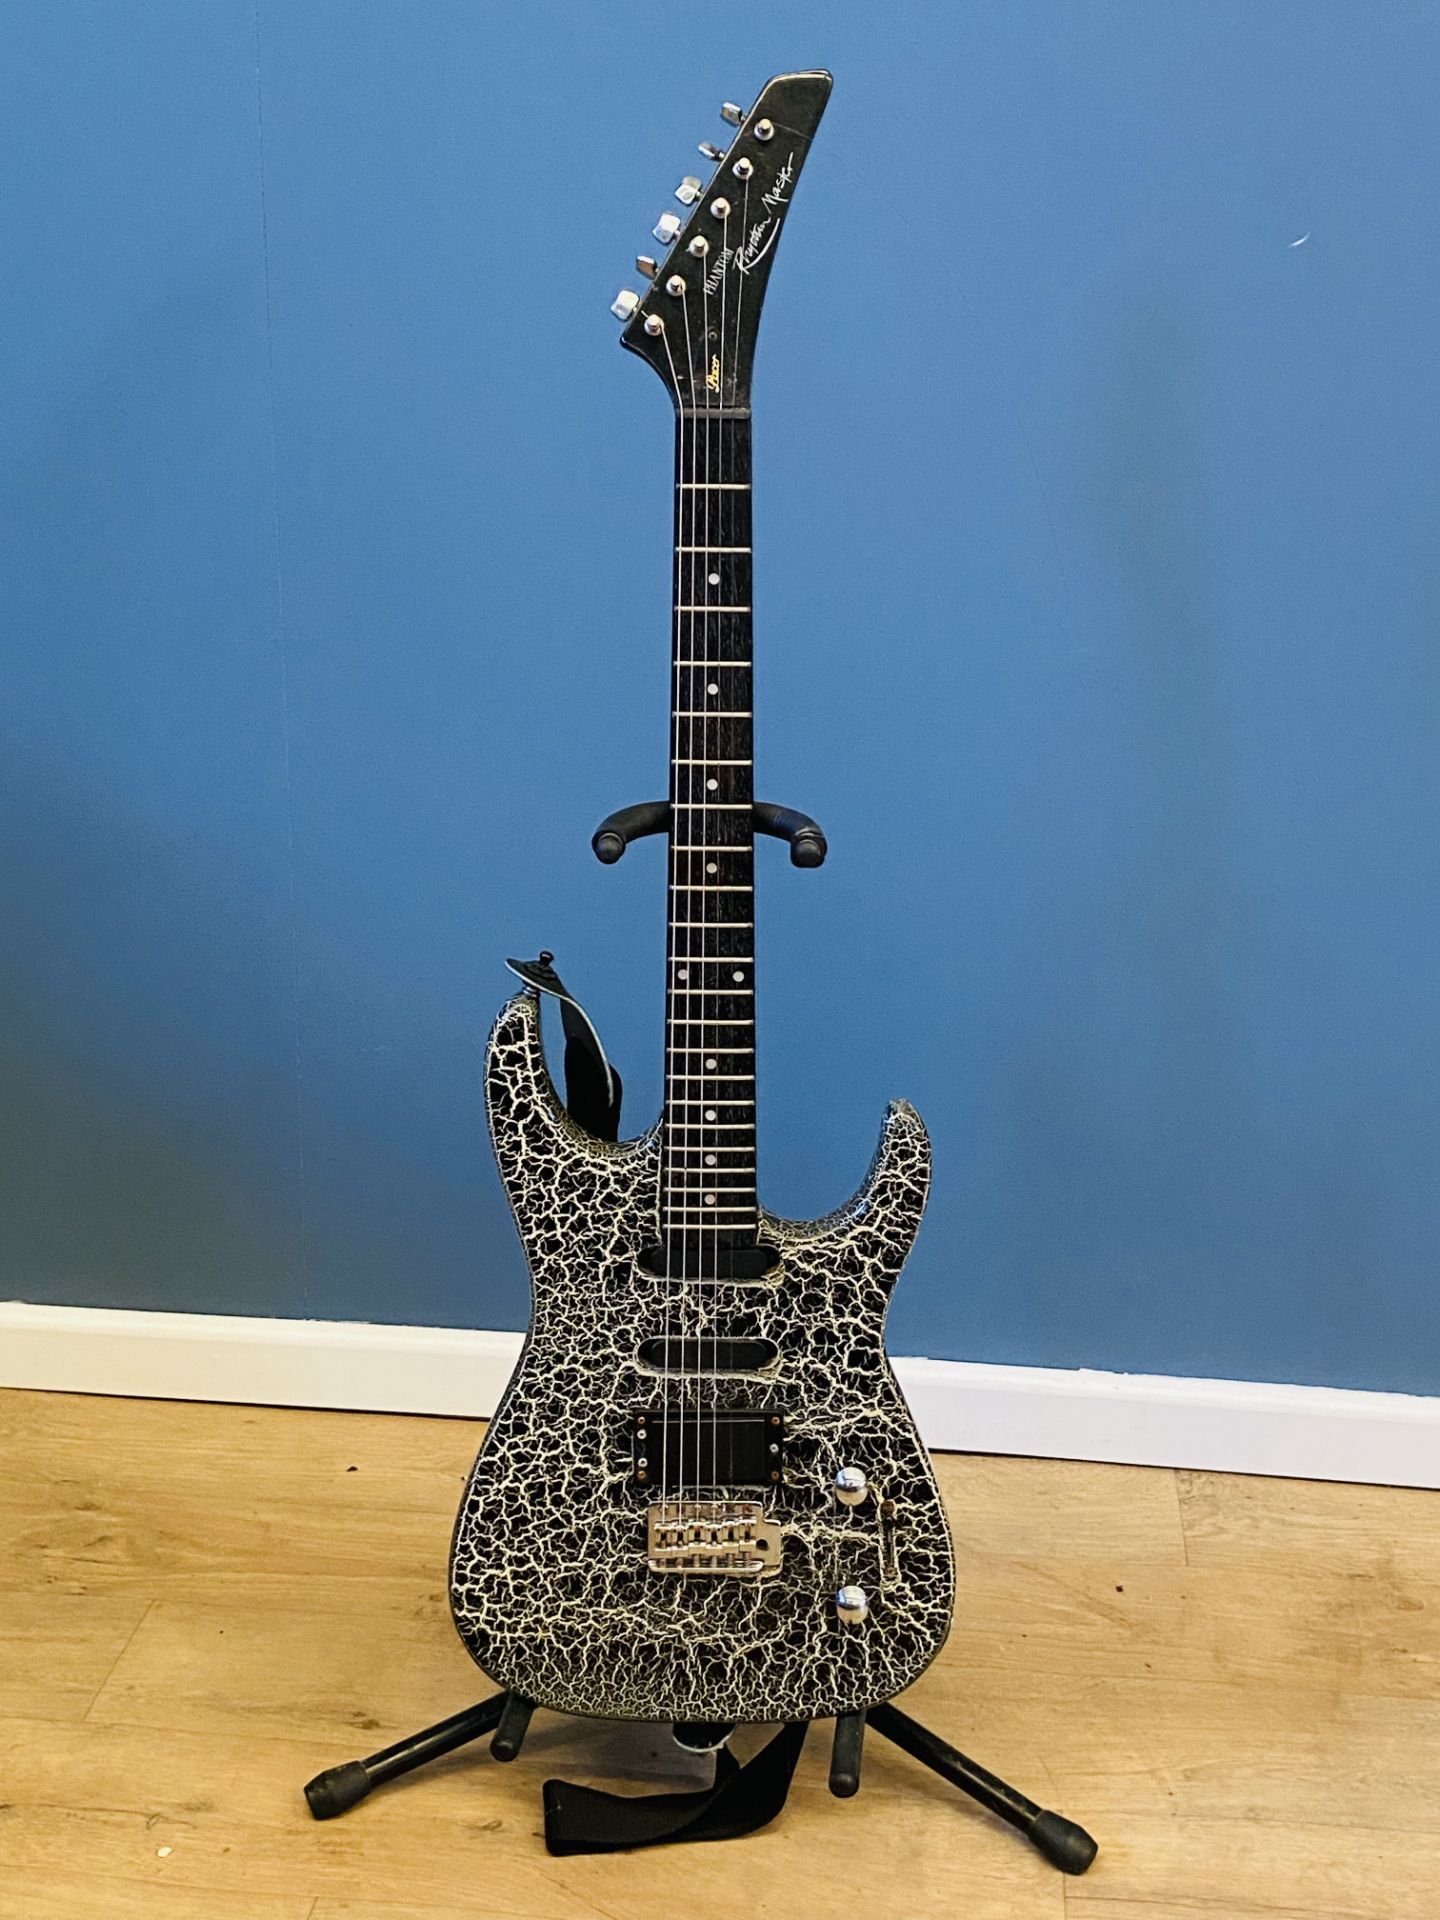 Pacer Phantom Rhythm Master electric guitar with crackle finish.